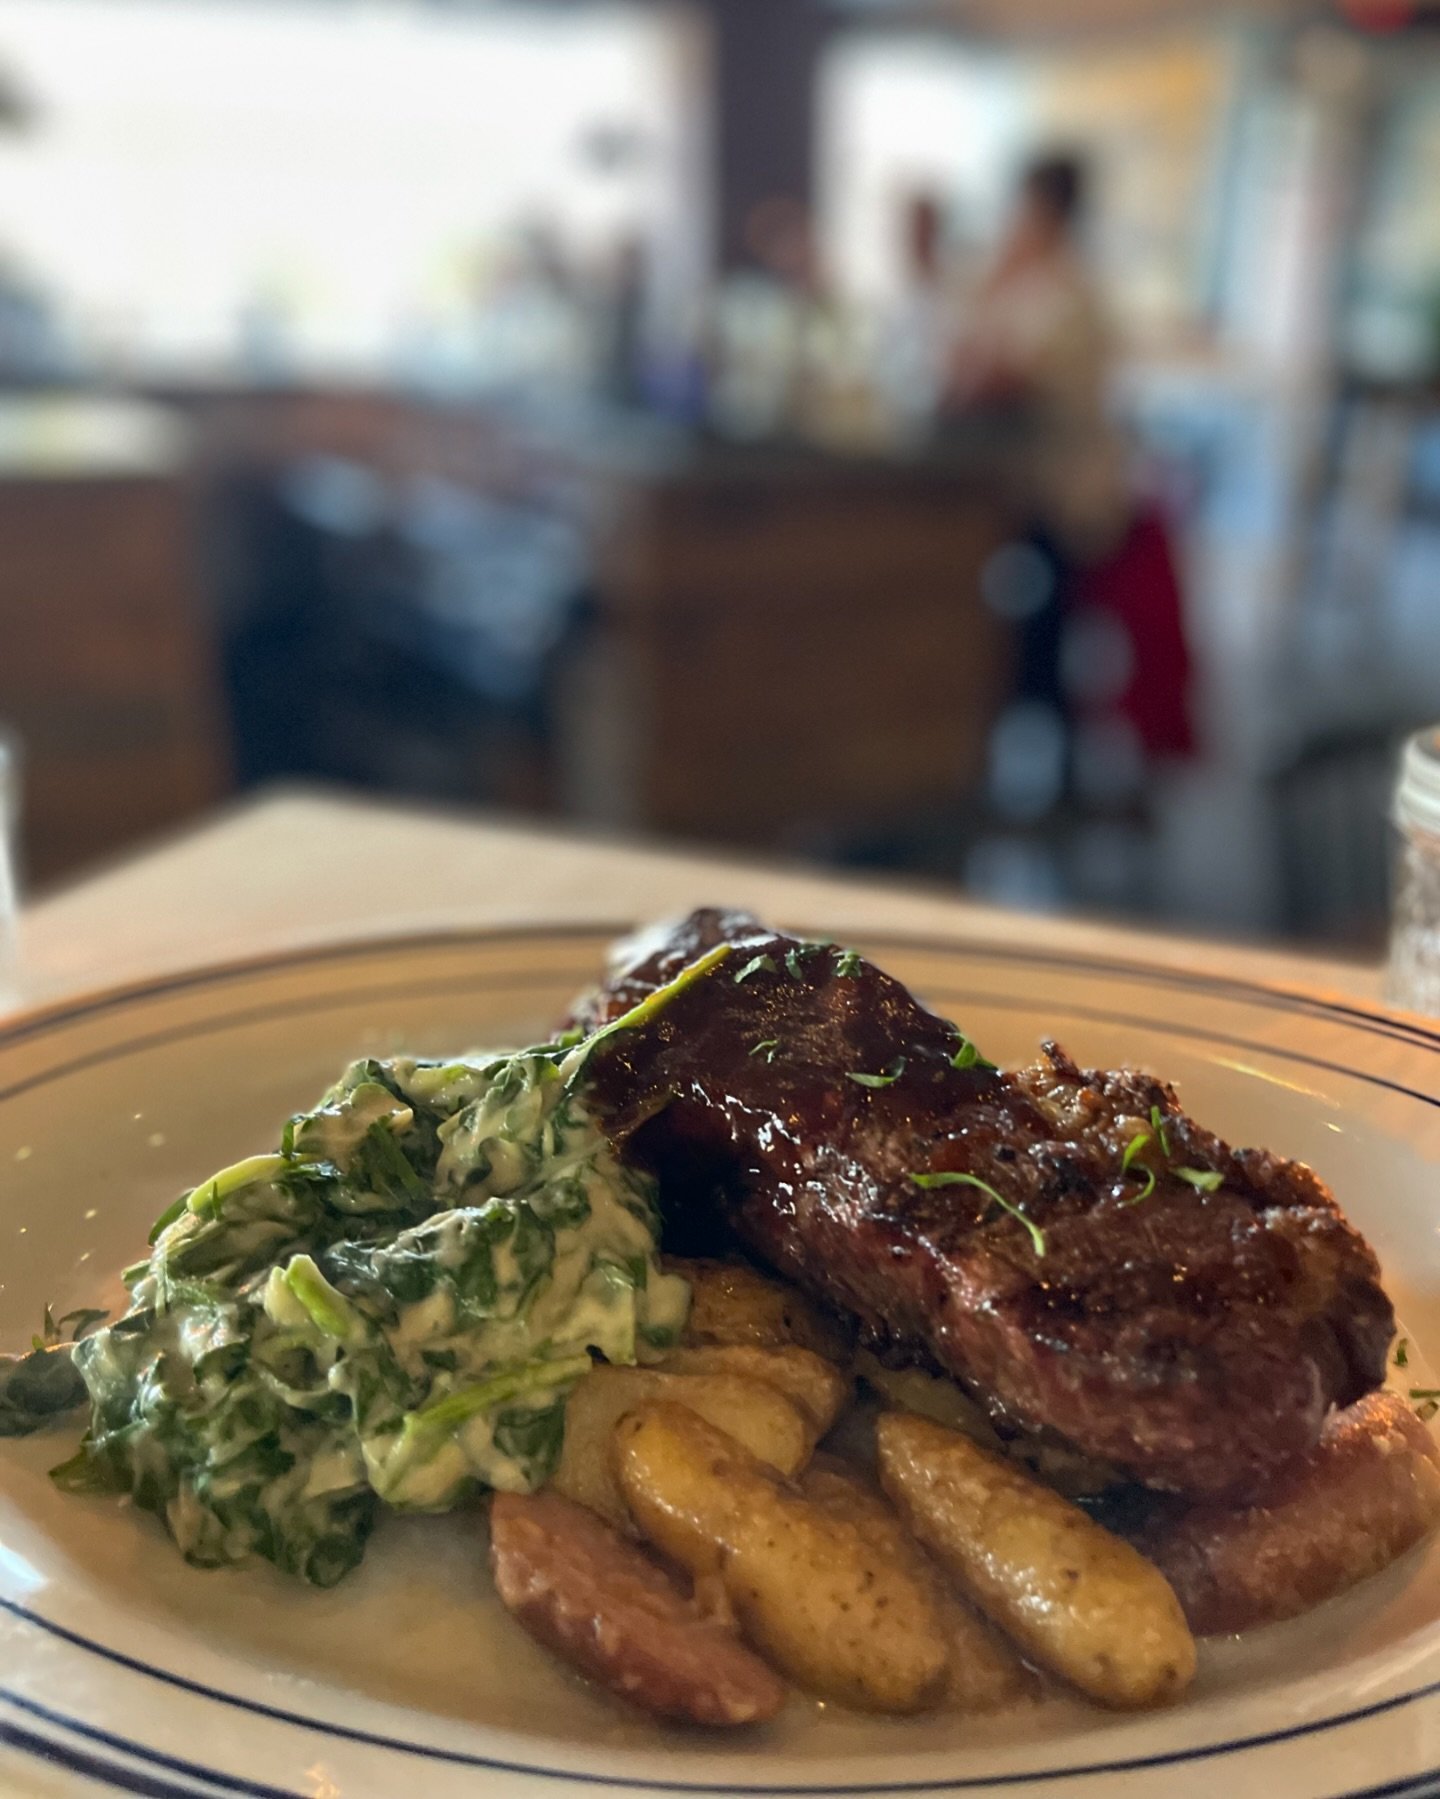 Indulging in this NY Strip with creamy spinach, fingerling potatoes, and a killer mushroom demi glac&eacute;. 😋 

Limited edition vibes, so don&rsquo;t sleep on it! 🥩✨ 

📸: @qwertyluv 

#SteakGoals #fingerlakes #GrassFedBeef #striptease